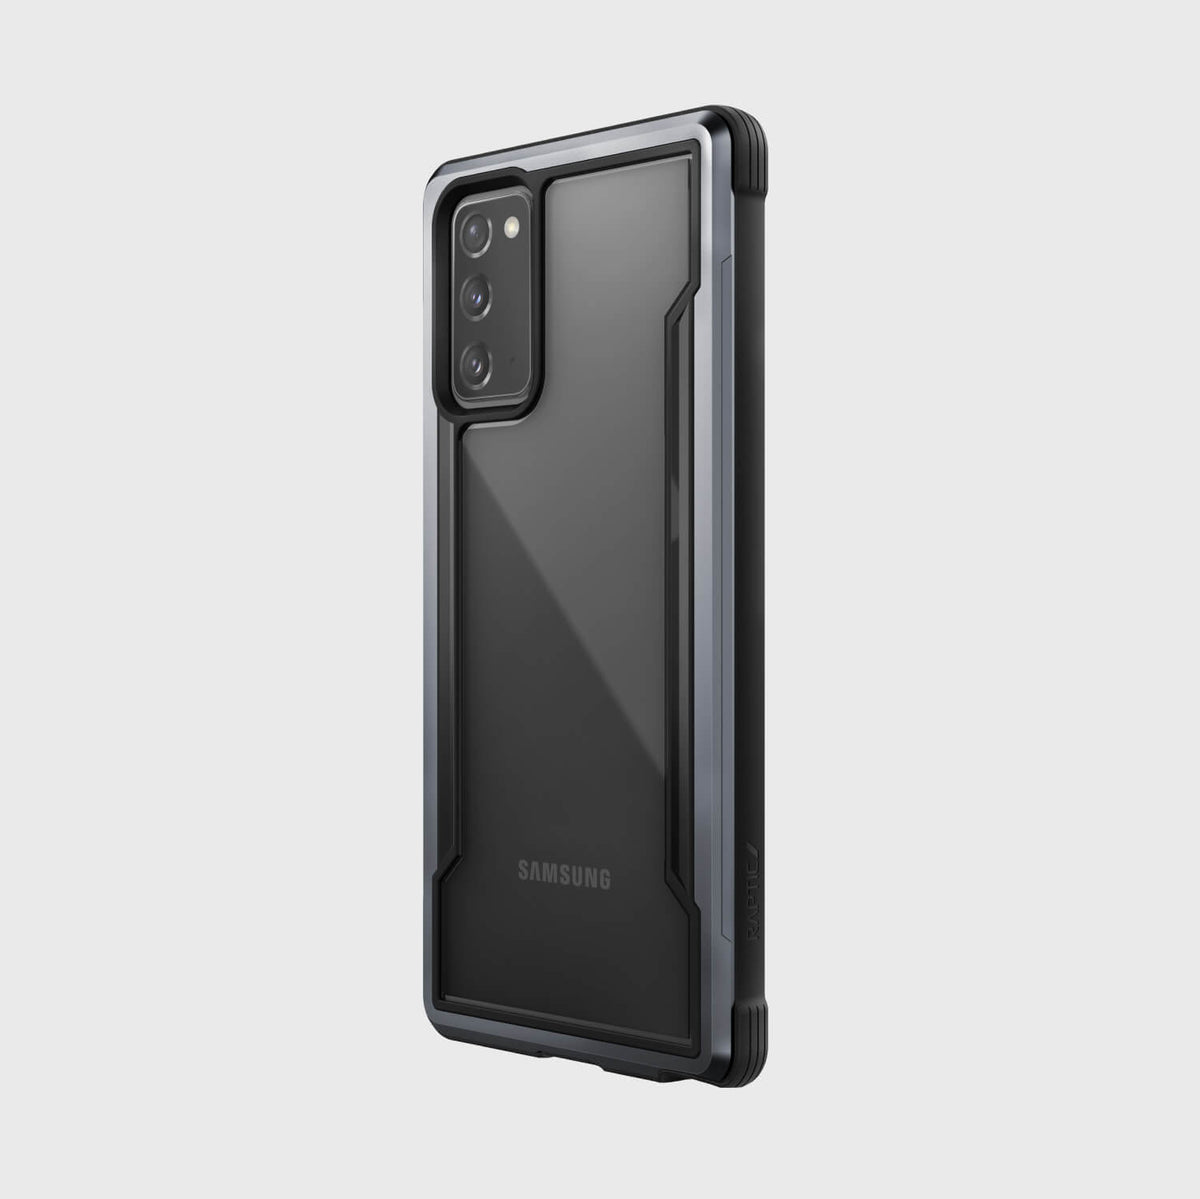 The Raptic Galaxy Note 20 Case - SHIELD Black is shown in black and offers drop protection and wireless charging compatibility.